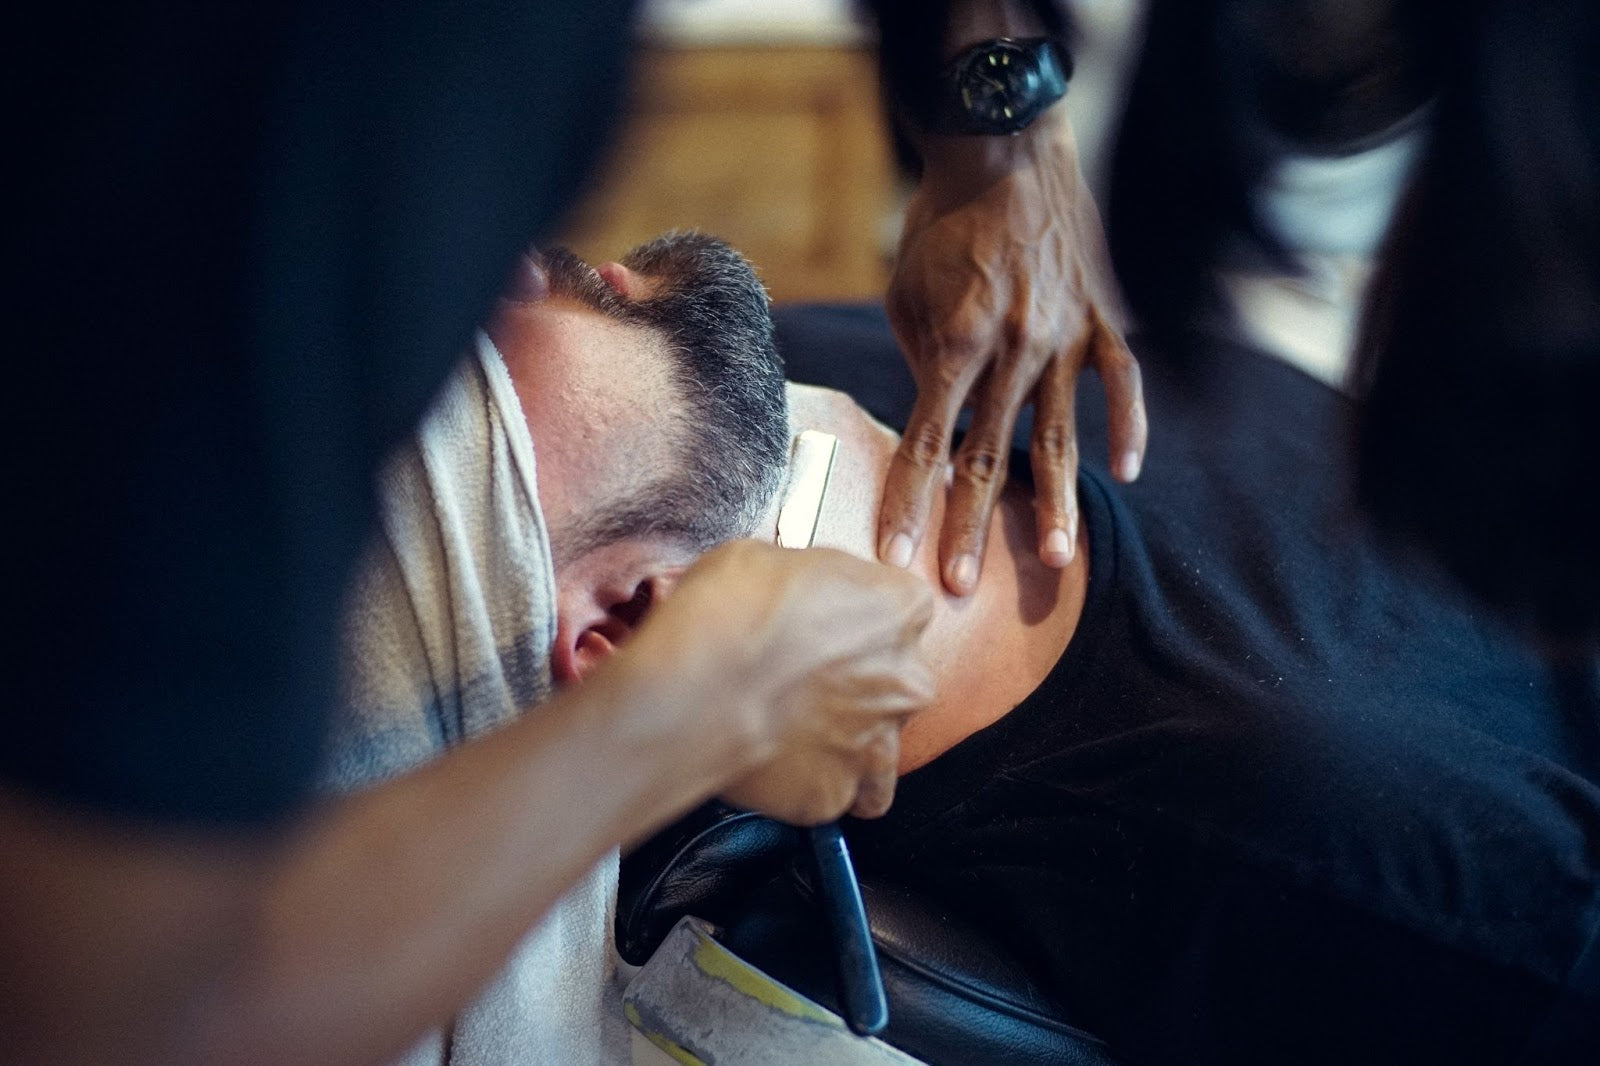 How to Shave With a Straight Razor: Step by Step